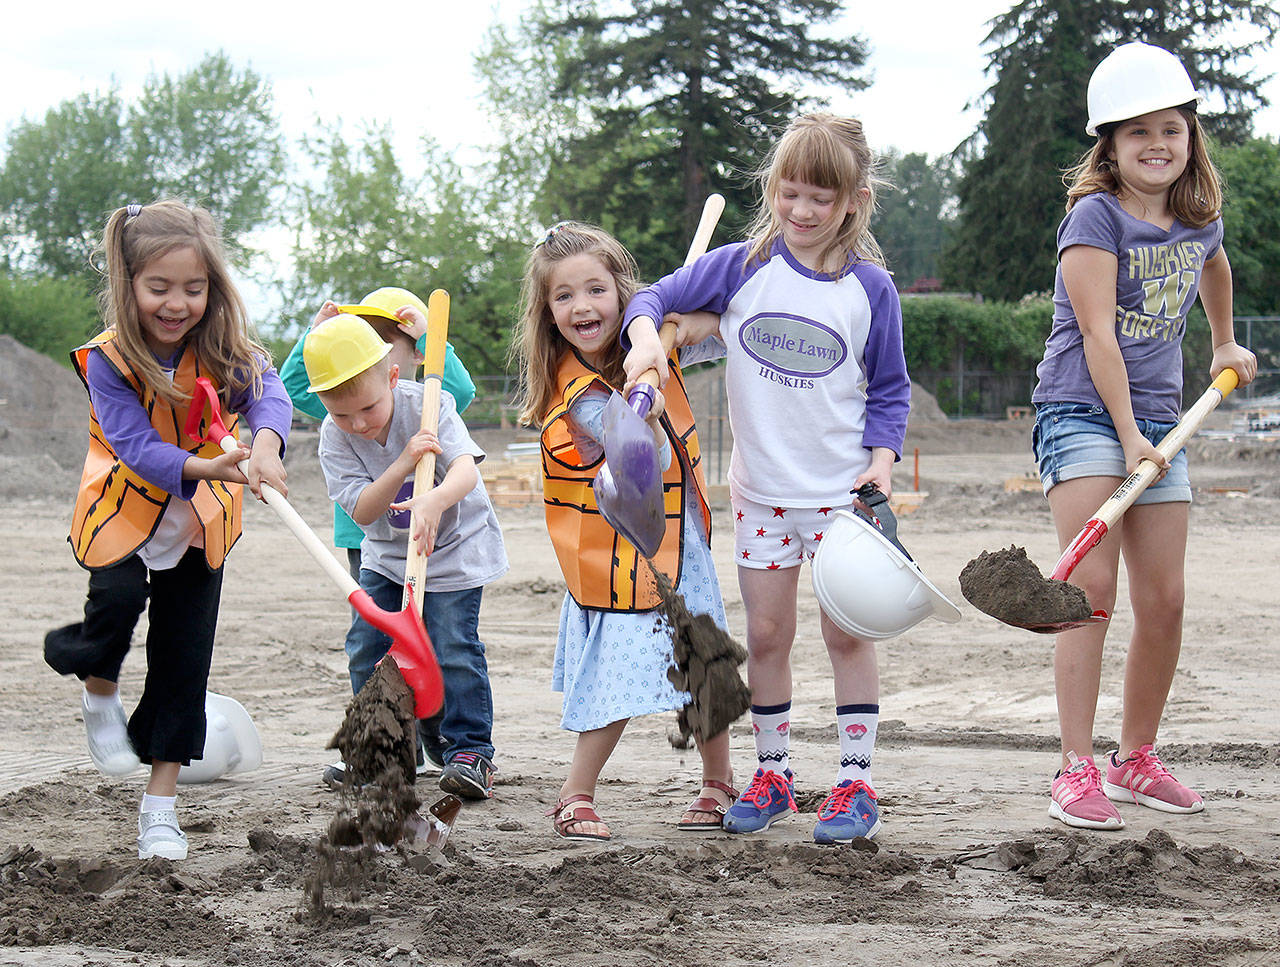 Students from Maple Lawn and Daffodil Valley elementary schools started the groundbreaking event with a song called “Mr. Sun,” and participated in breaking ground. Photo by Ray Miller-Still